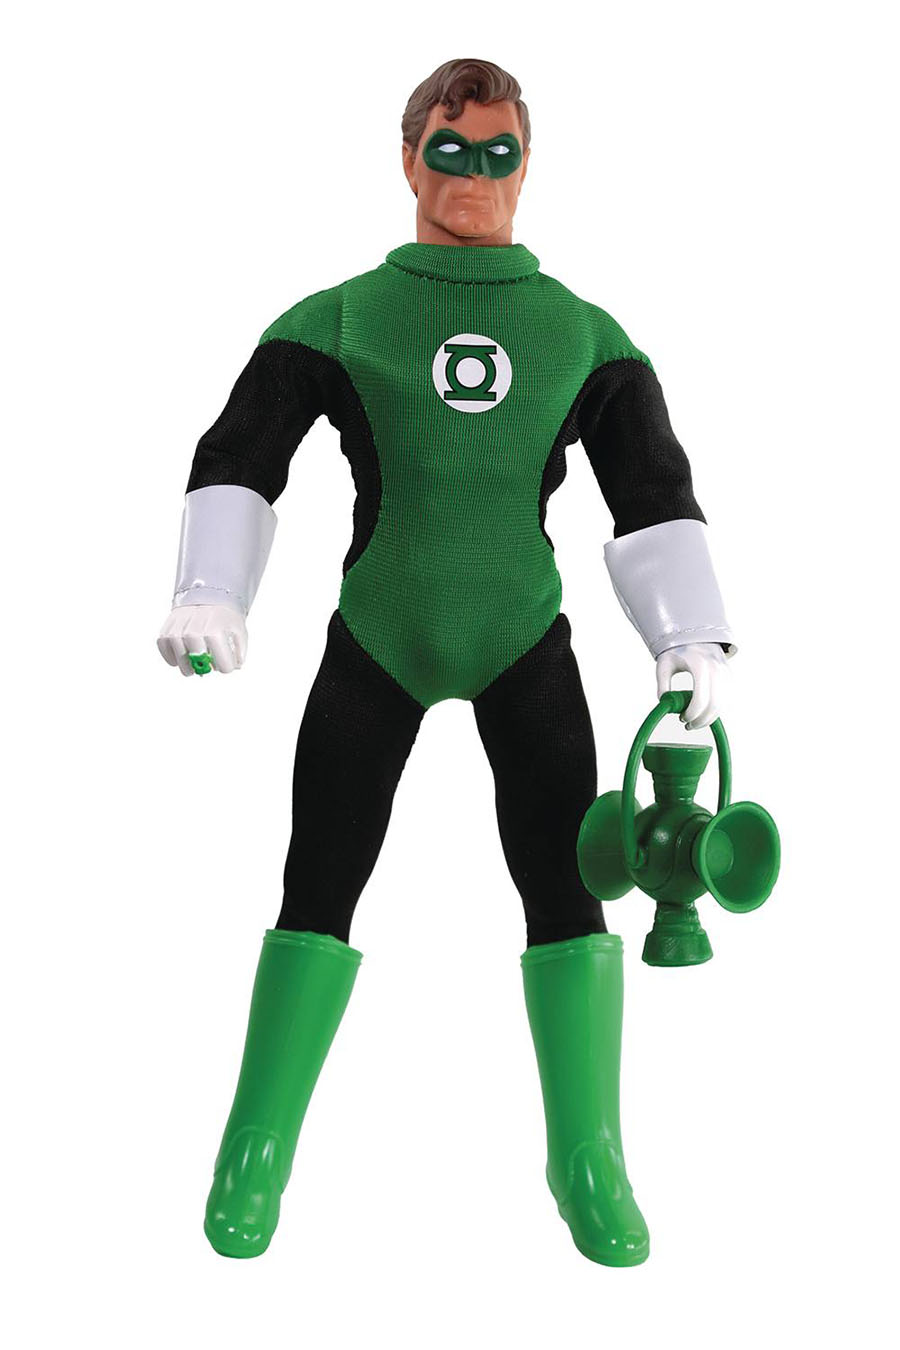 Mego DC Classic 50th Anniversary 8-Inch Action Figure - Green Lantern